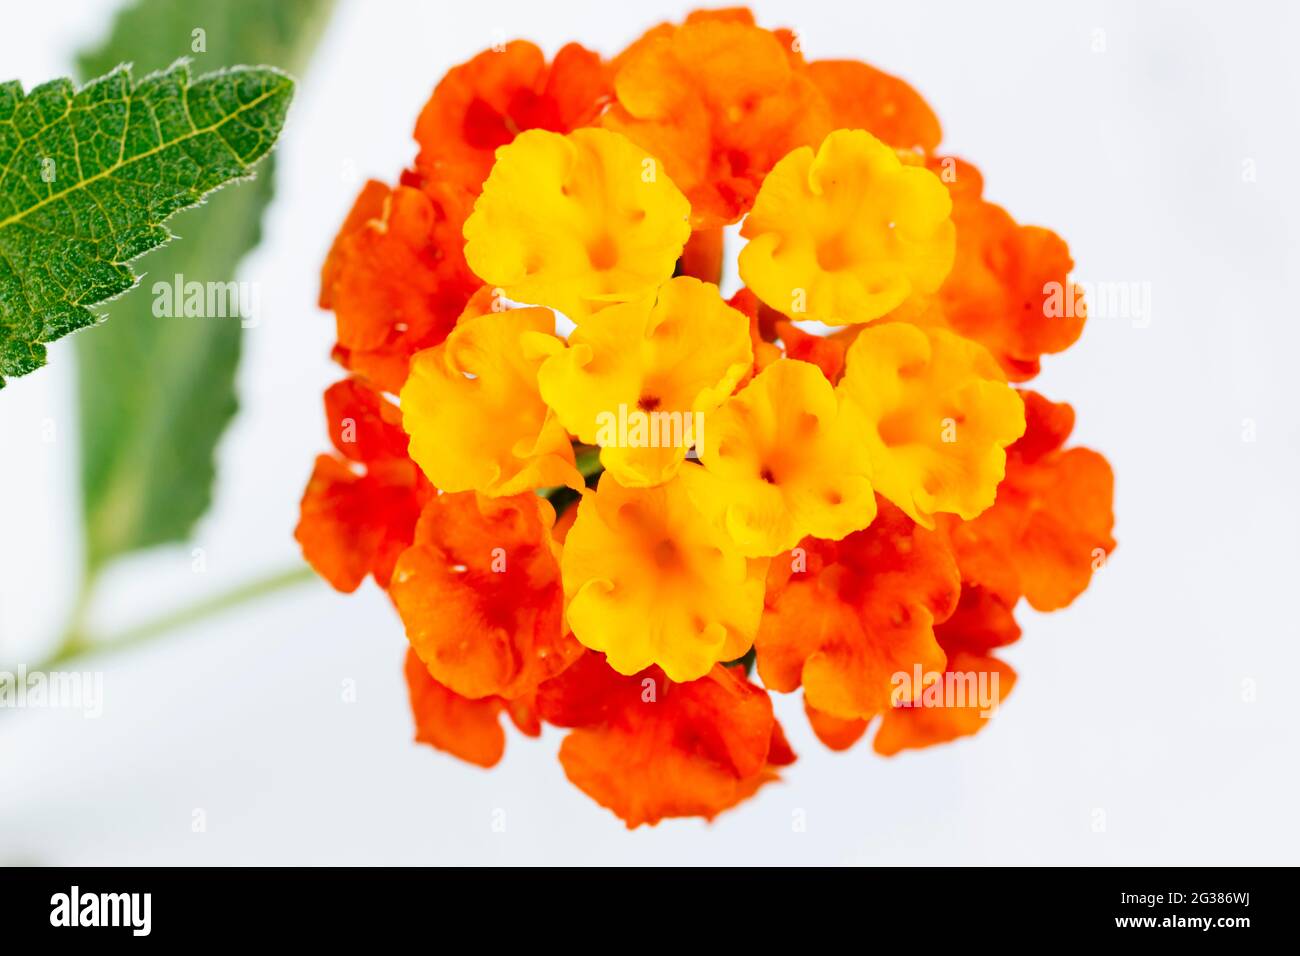 Lantana camara, commonly called lantana, is a shrub in the genus Lantana. It is native to Central and South America.It is included in the list of 100 Stock Photo